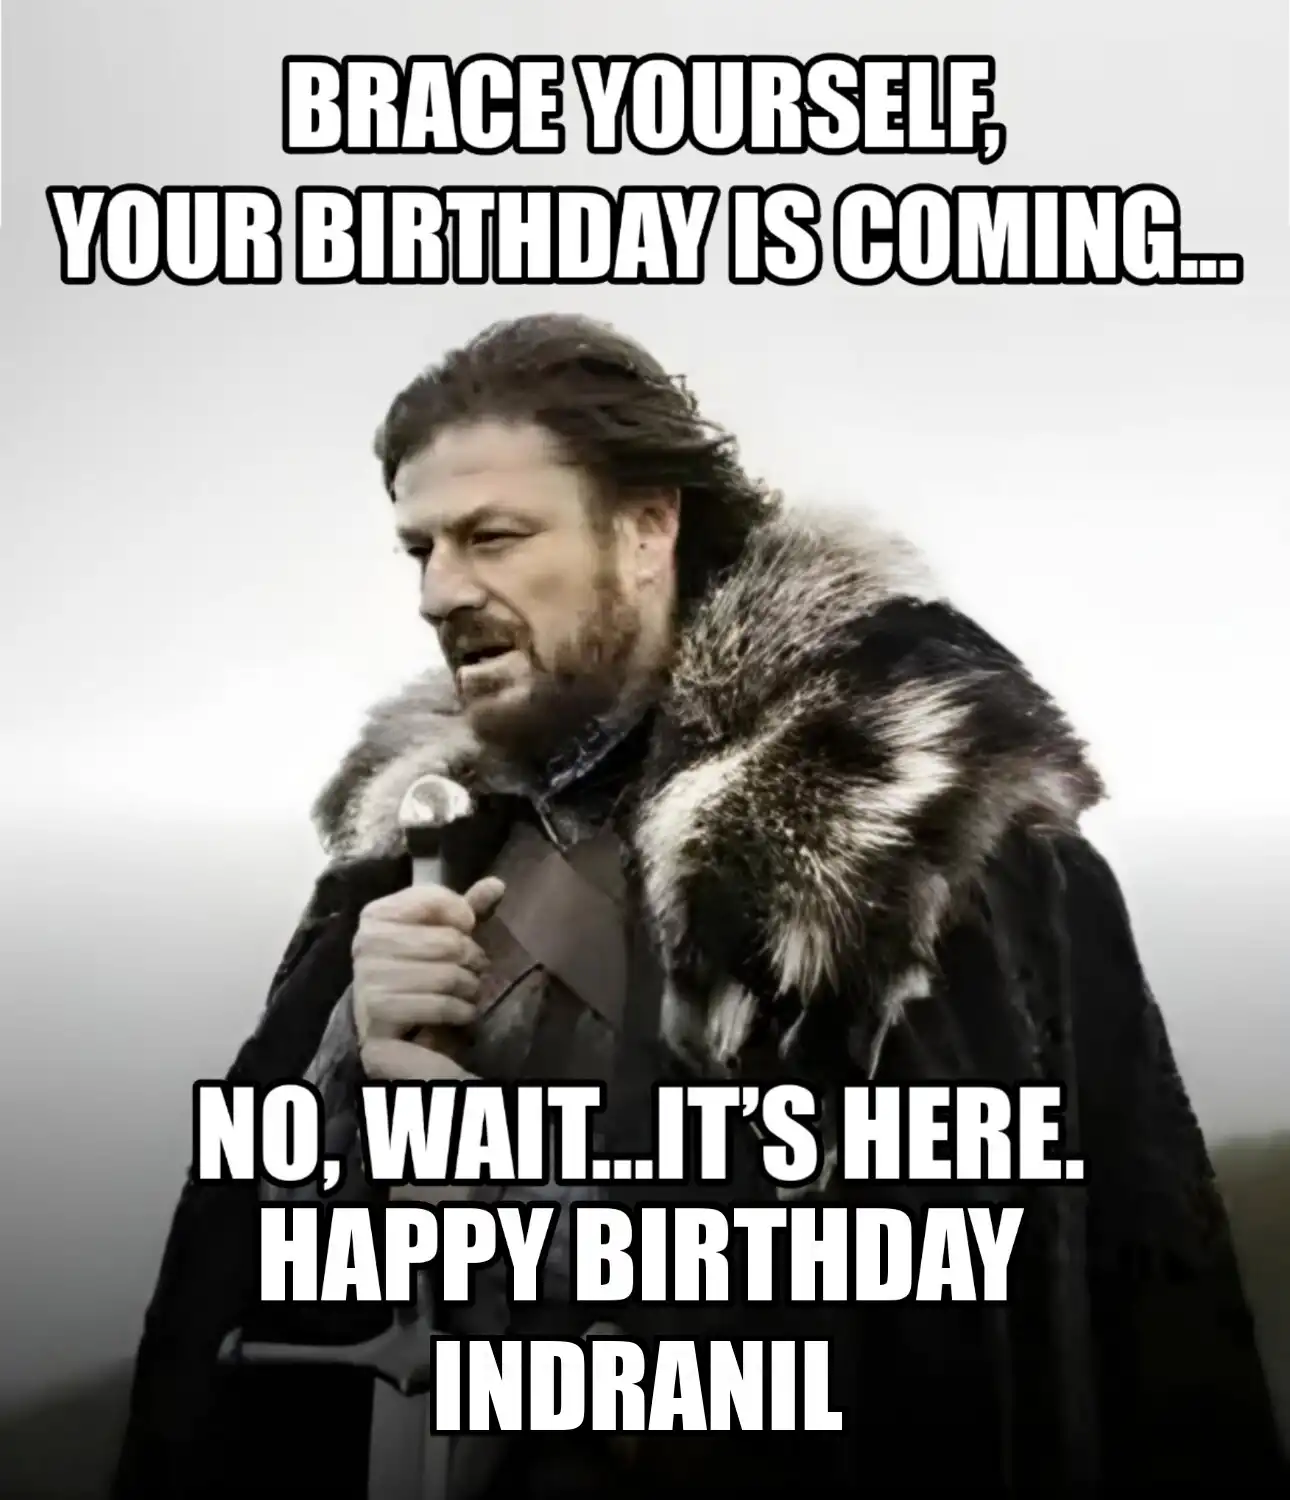 Happy Birthday Indranil Brace Yourself Your Birthday Is Coming Meme